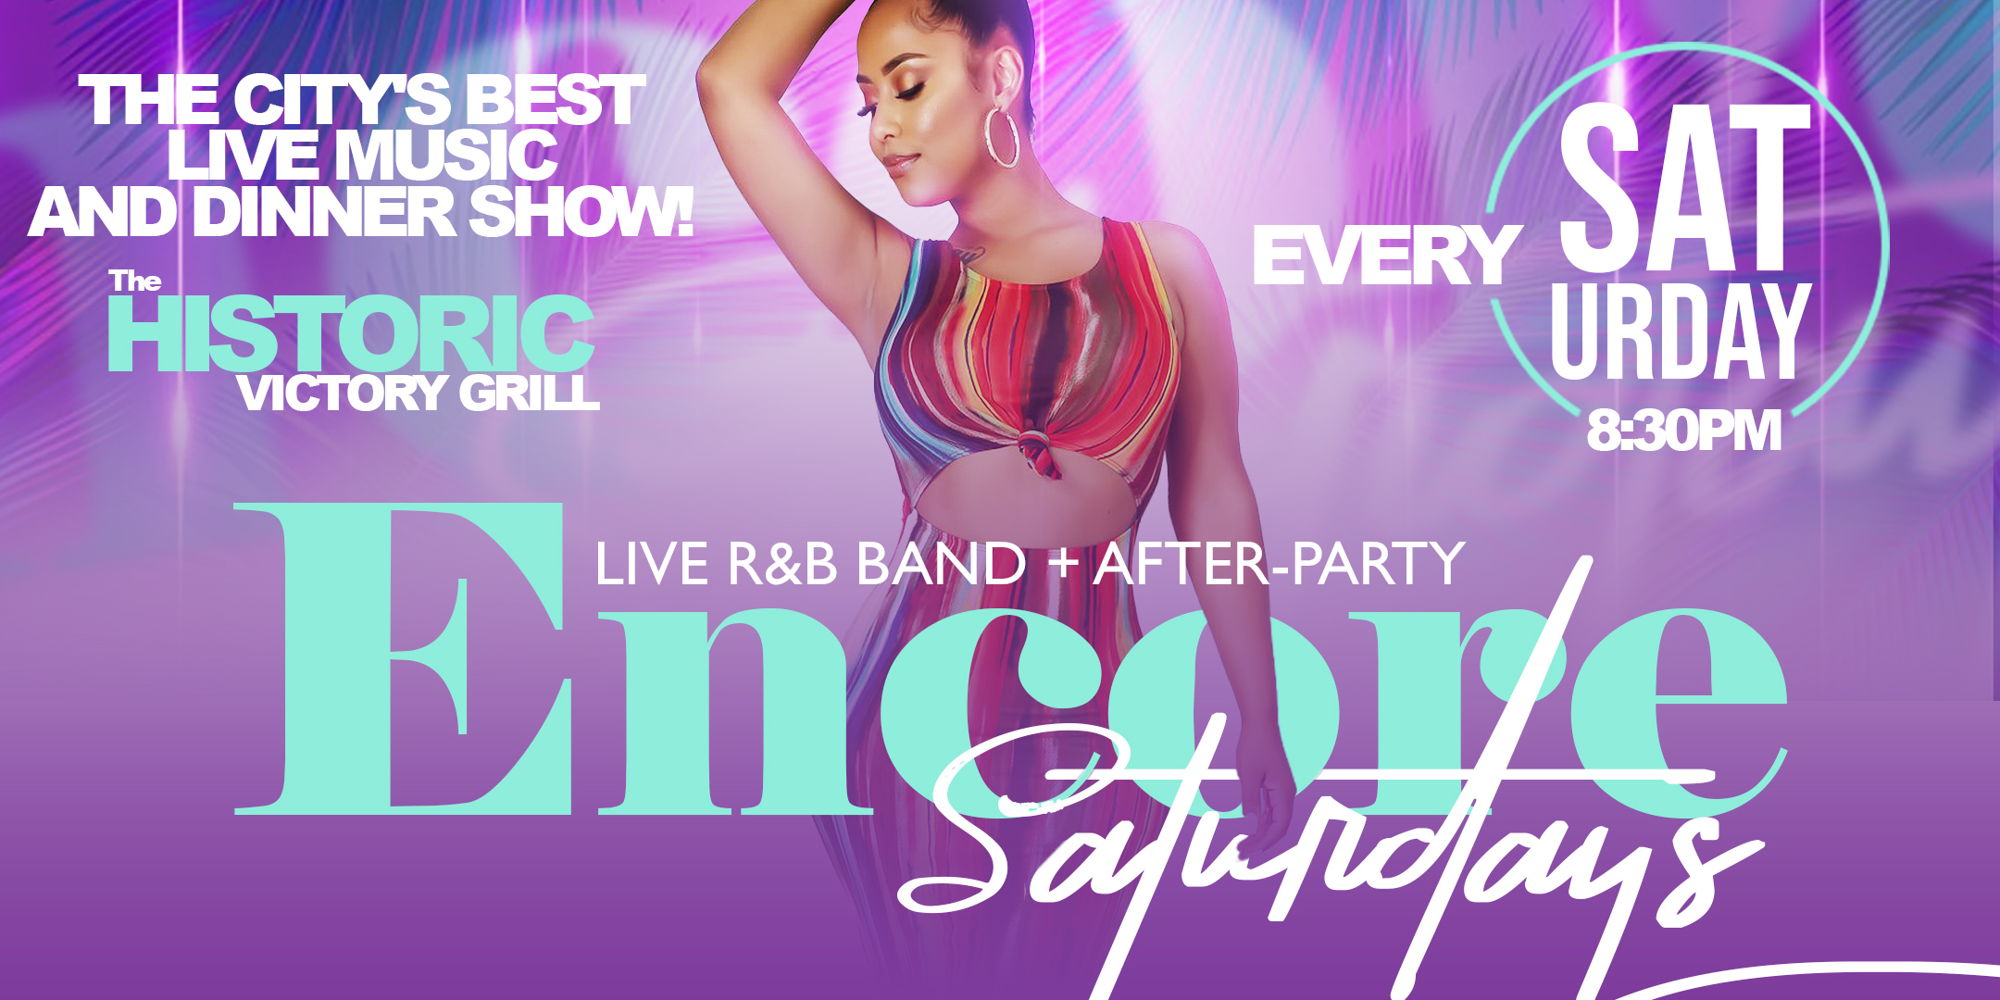 Encore Saturdays | Dinner, Live Band, Aftier-Party promotional image